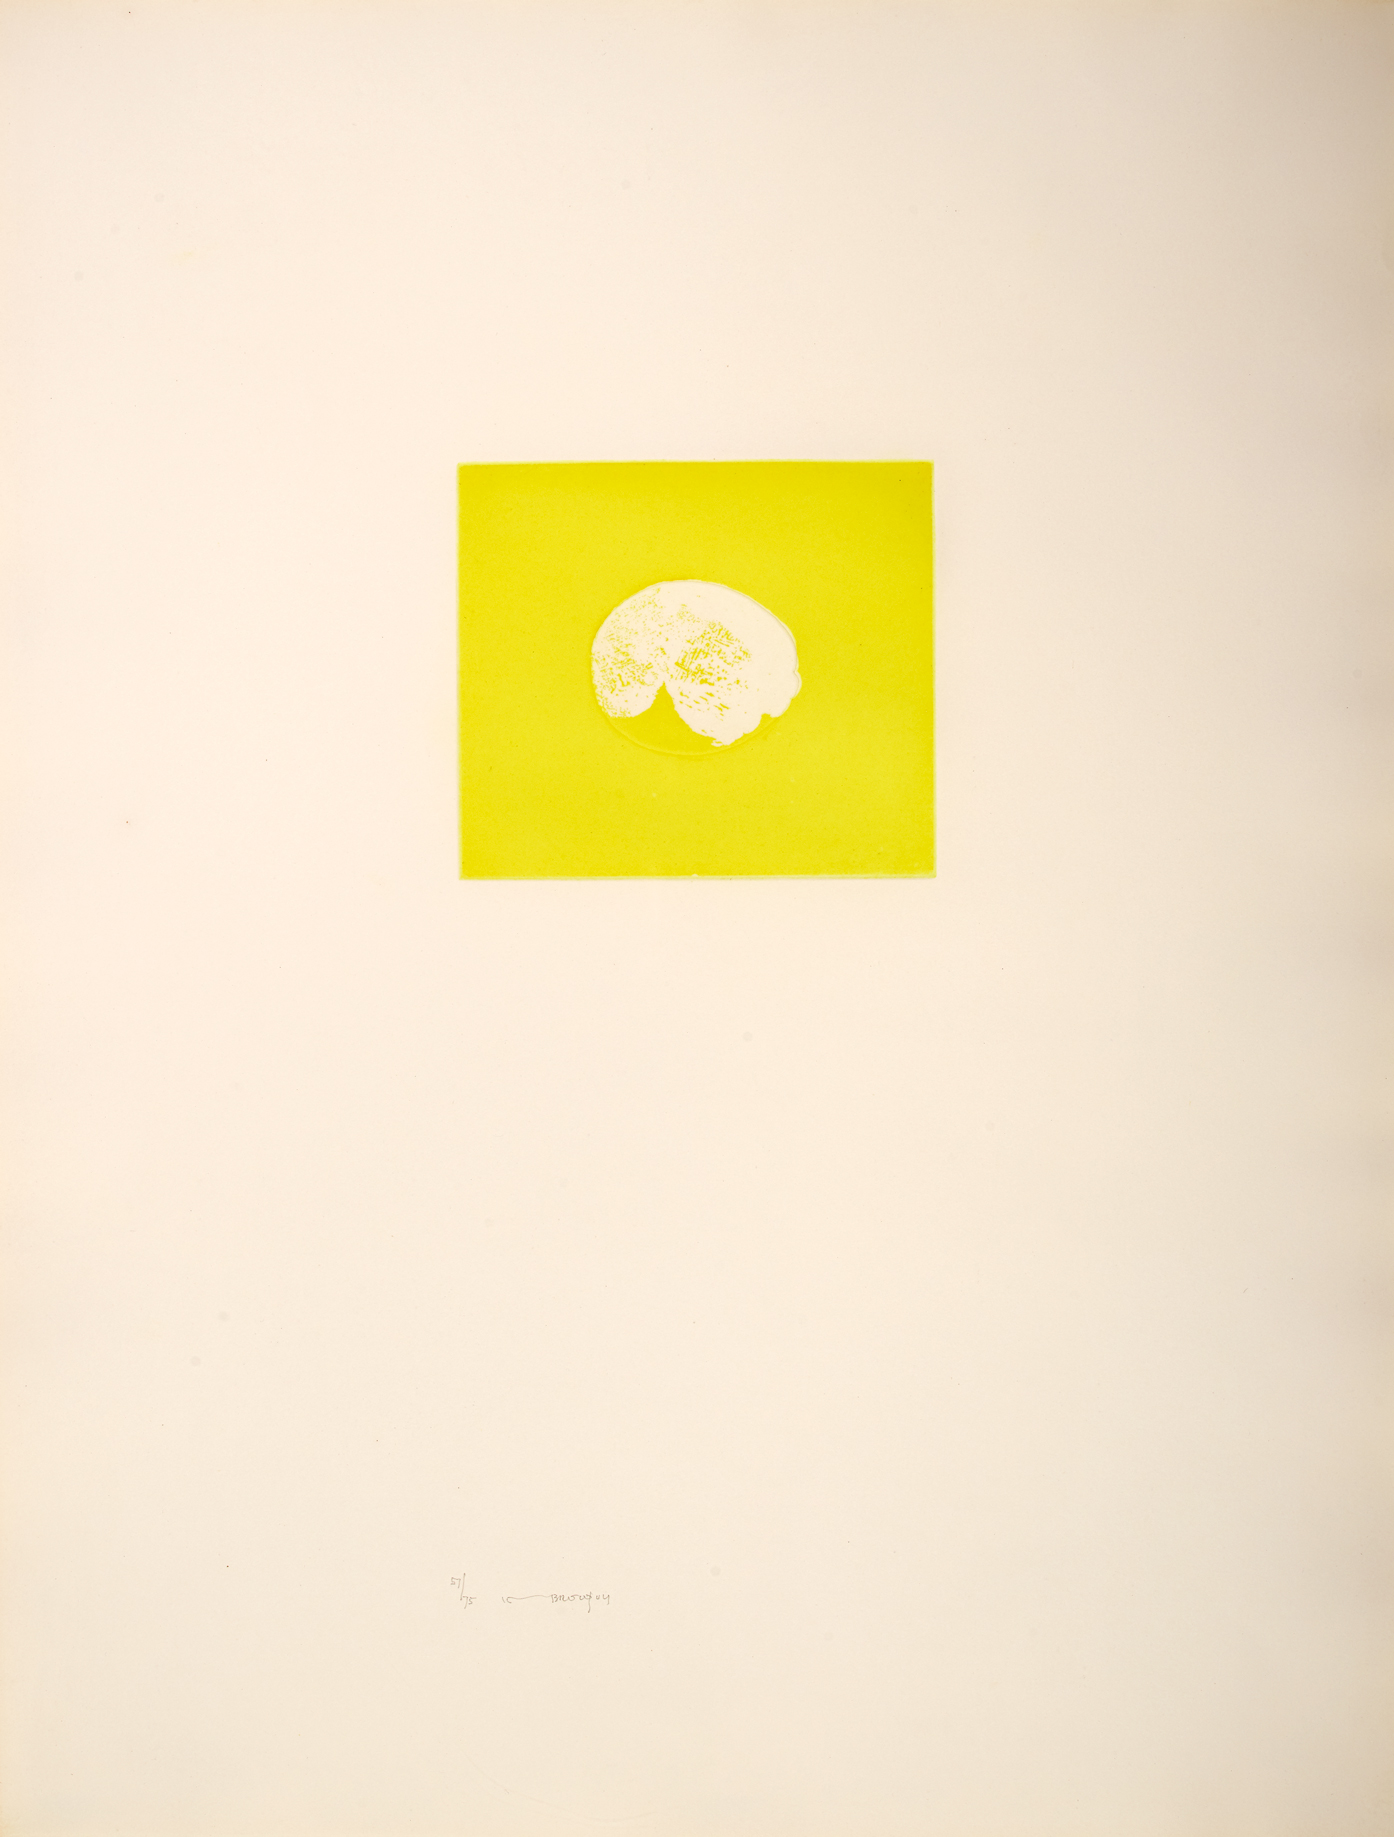 Louis le Brocquy HRHA (1916-2012) NO LEMON, 1974 Intaglio print on paper; (no. 57 from an edition of